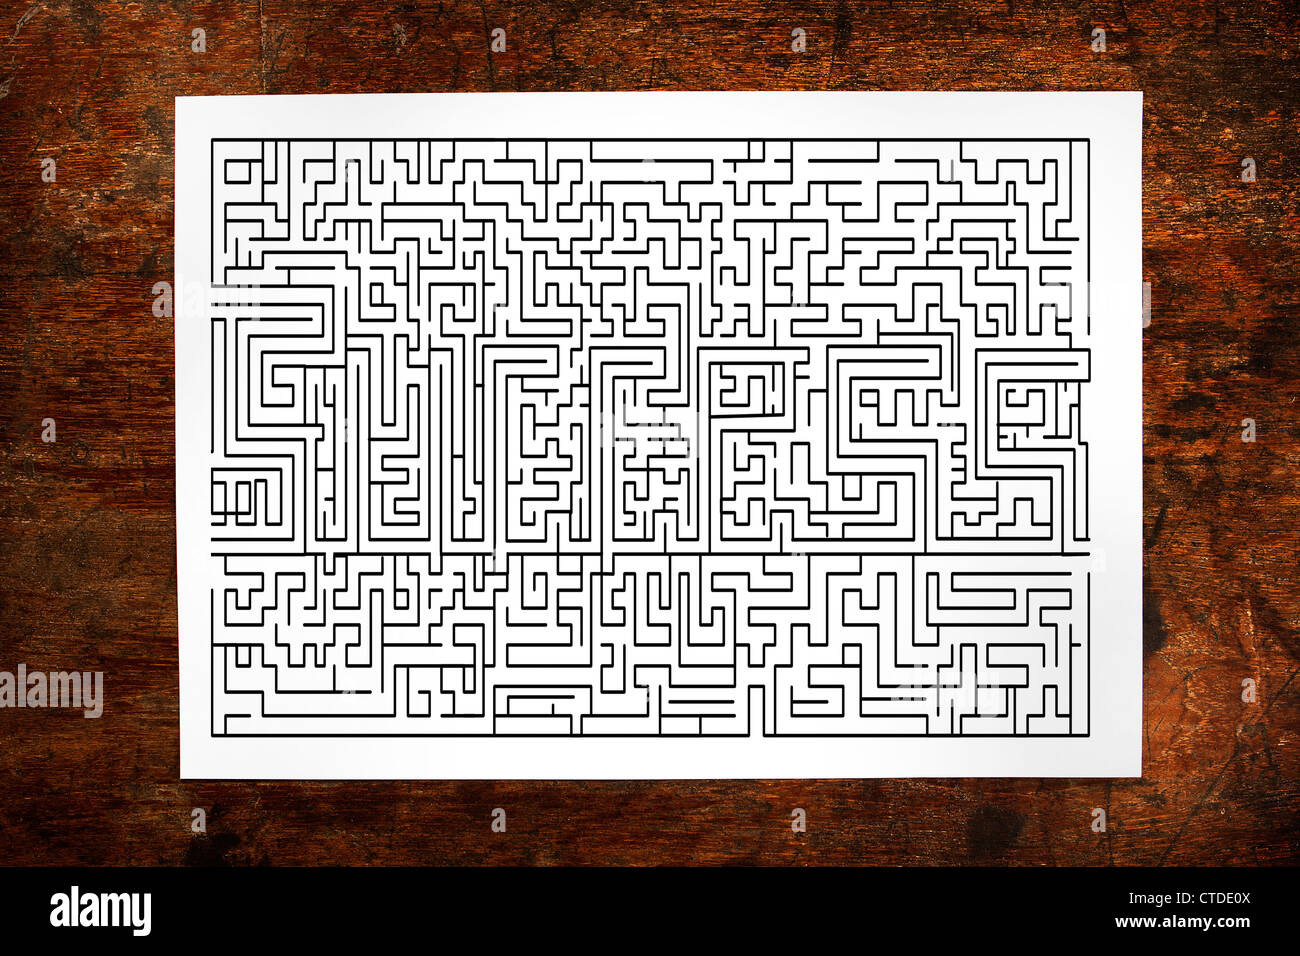 Channel maze game on wood background Stock Photo